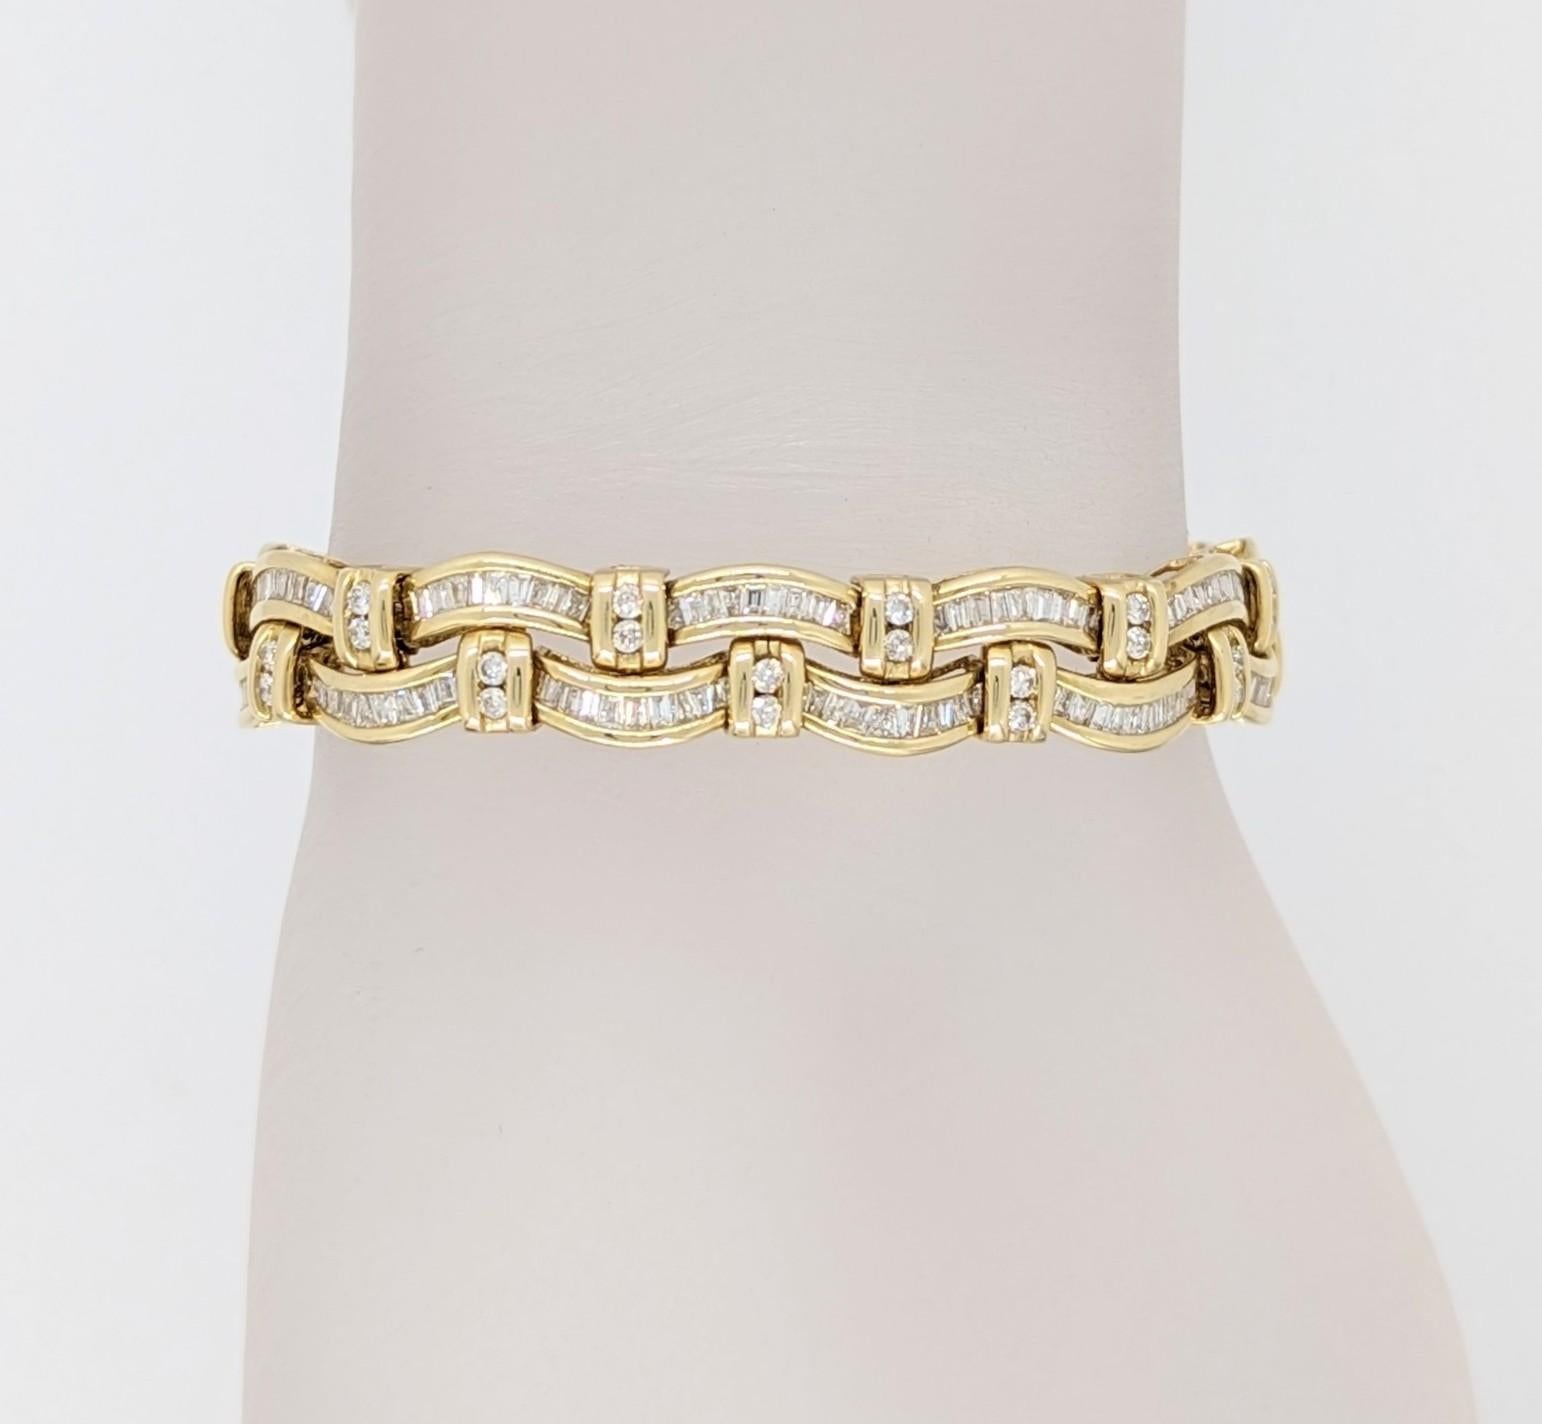 Beautiful bracelet with 6.00 ct. of good quality white diamond baguettes and rounds.  Handmade in 14k yellow gold.  Length is 7